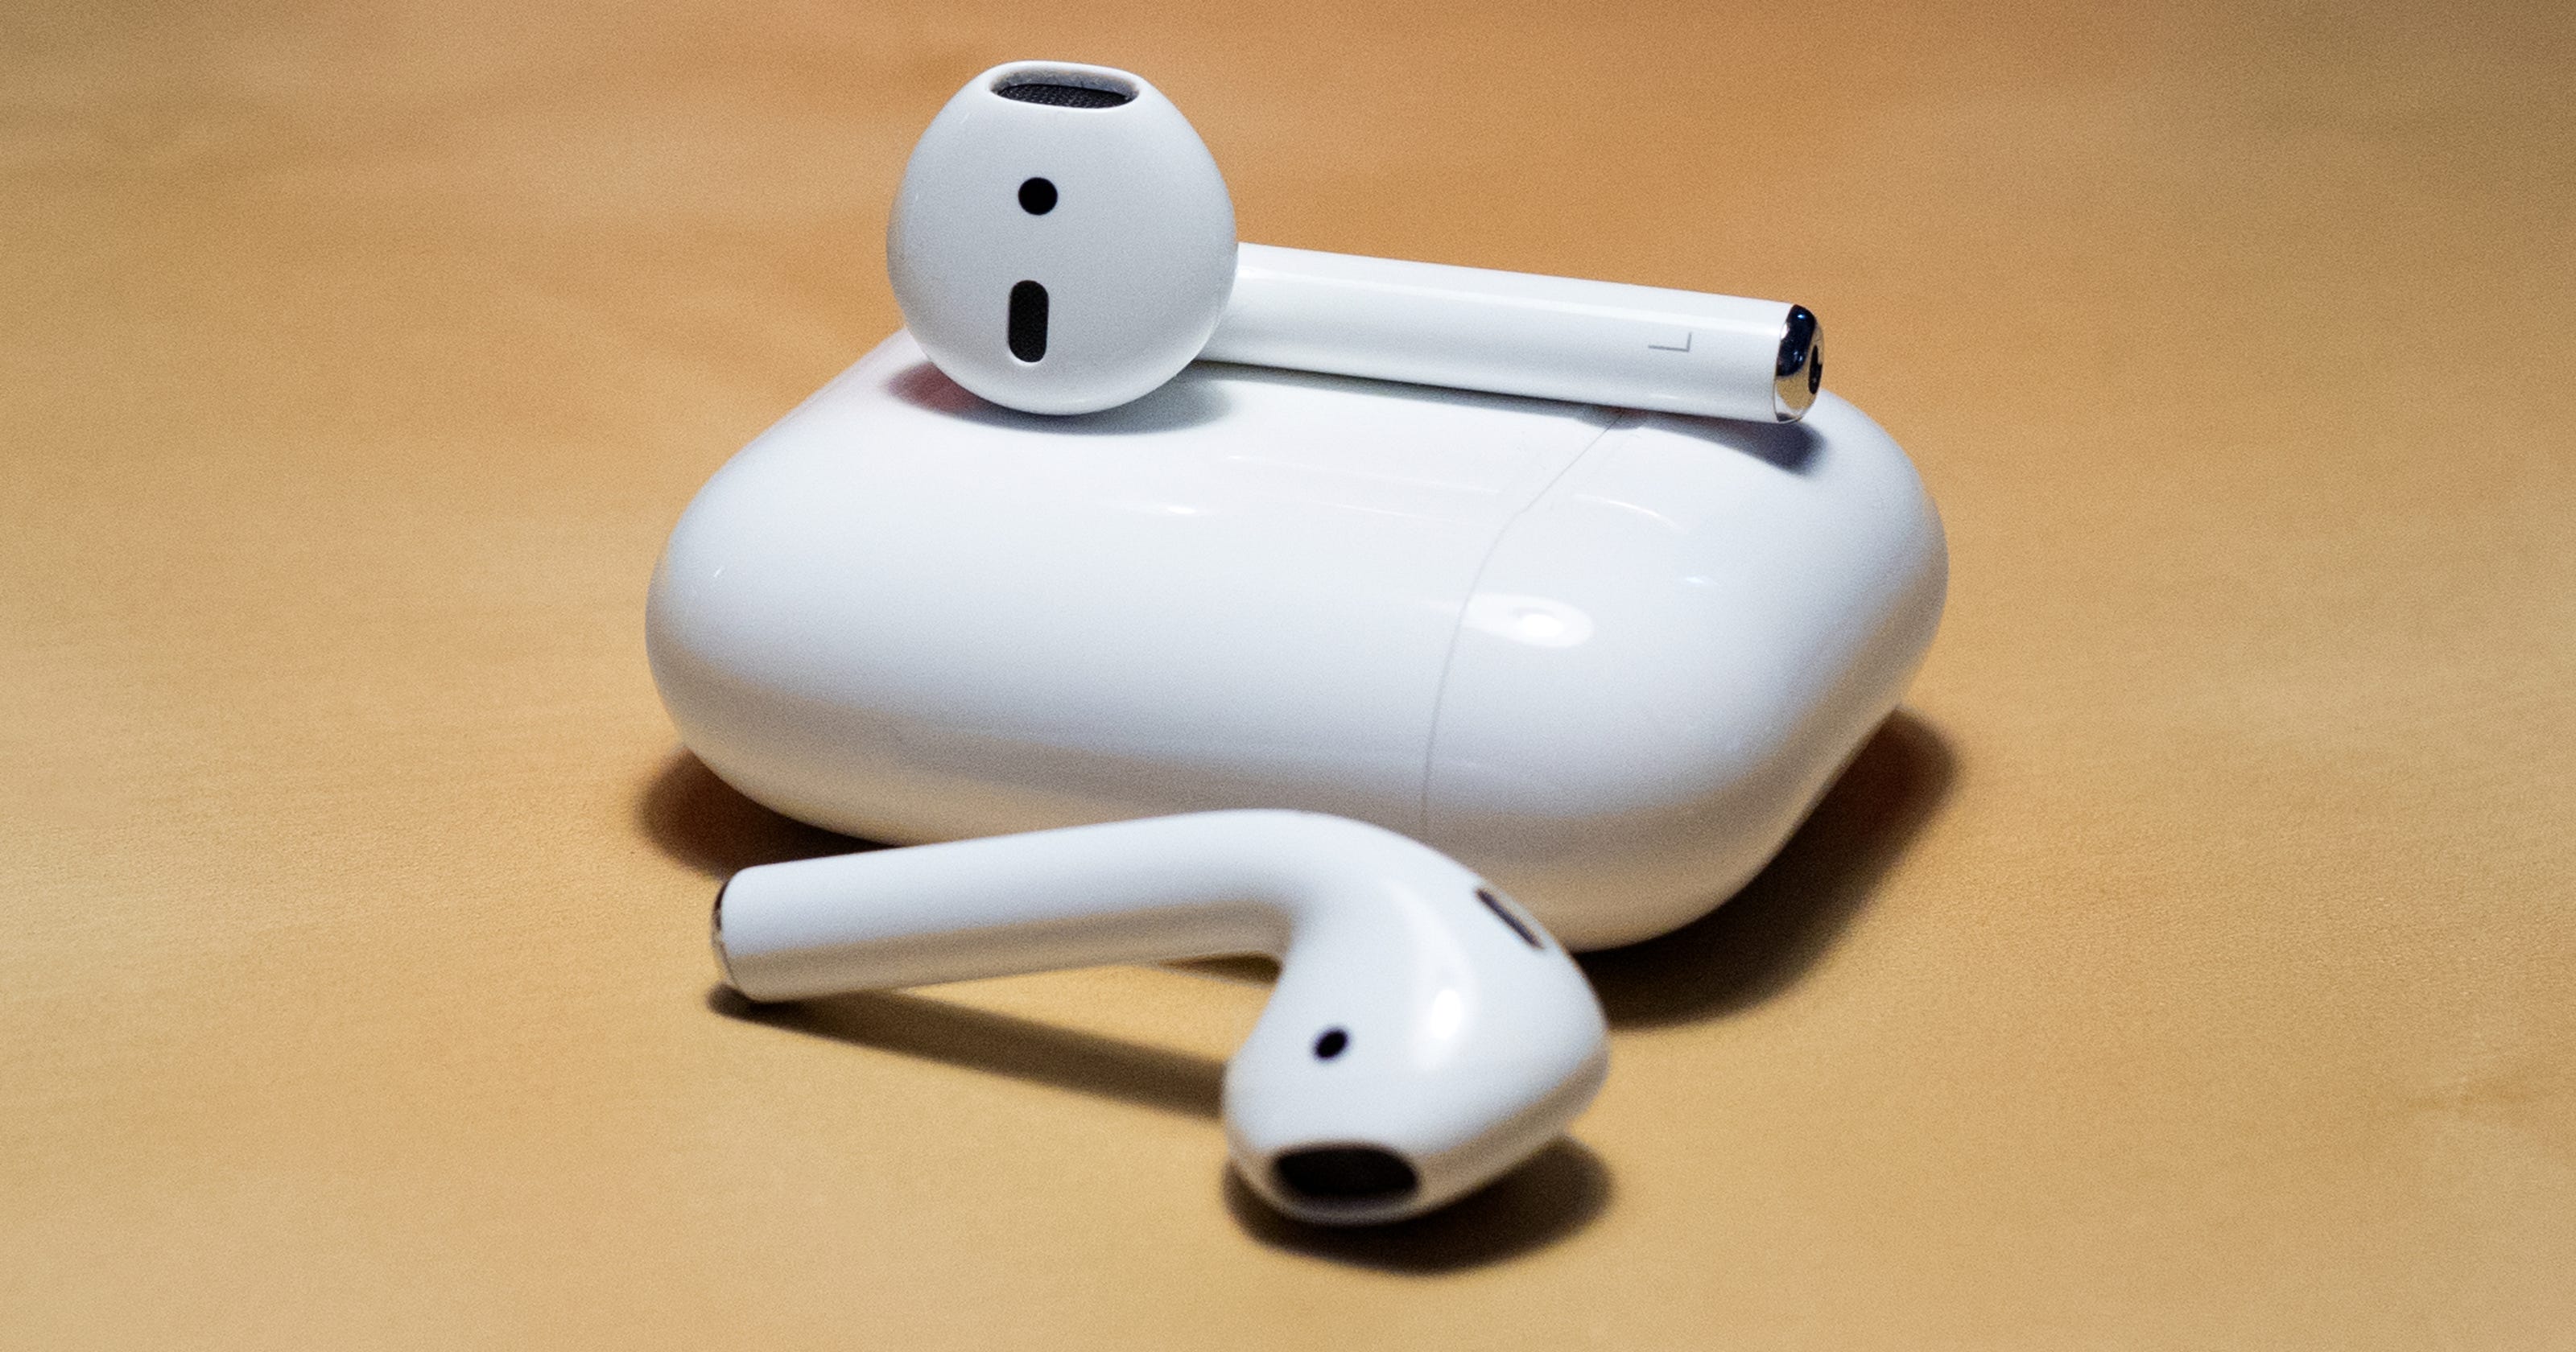 with-airpods-2-rumored-are-airpods-safe-to-buy-this-holiday-season